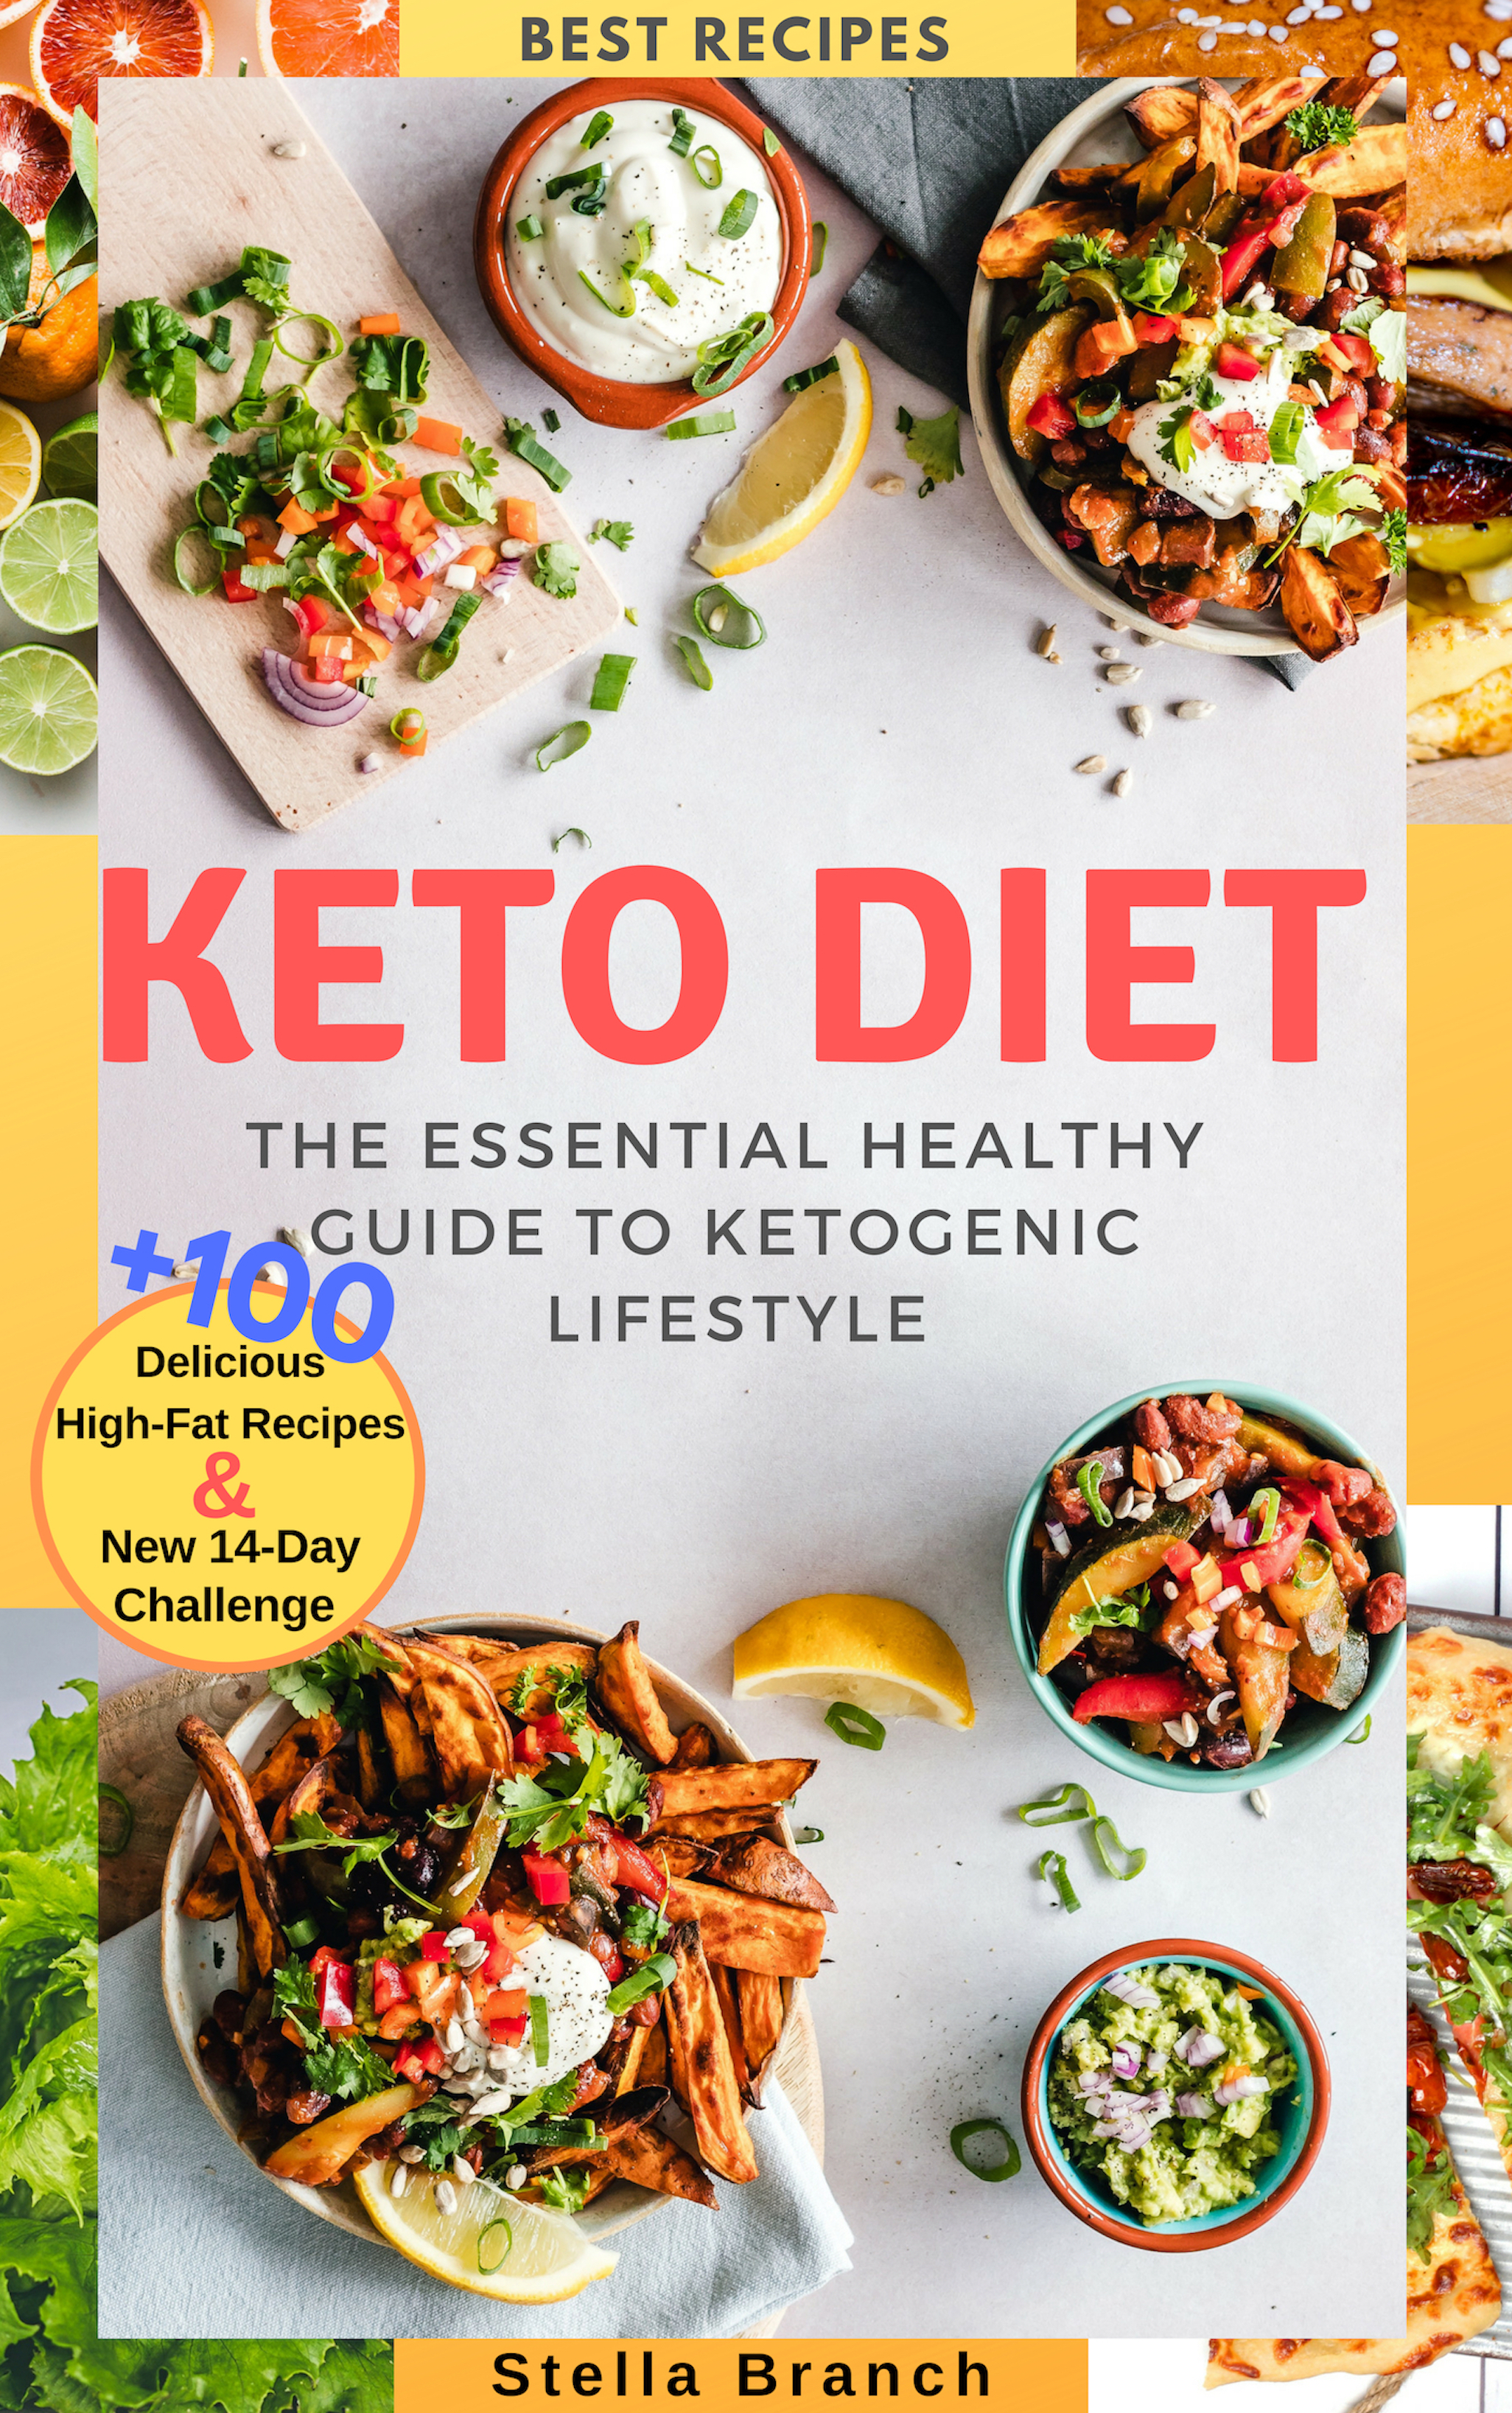 FREE: Essential Recipes Keto Diet Cookbook: Top 33 Easy Meals For You How To Lose Weight Complete Snacks And Dinner Menu Guide To The Keto Lifestyle (Lifestyle of KETO)  by STELLA BRANCH